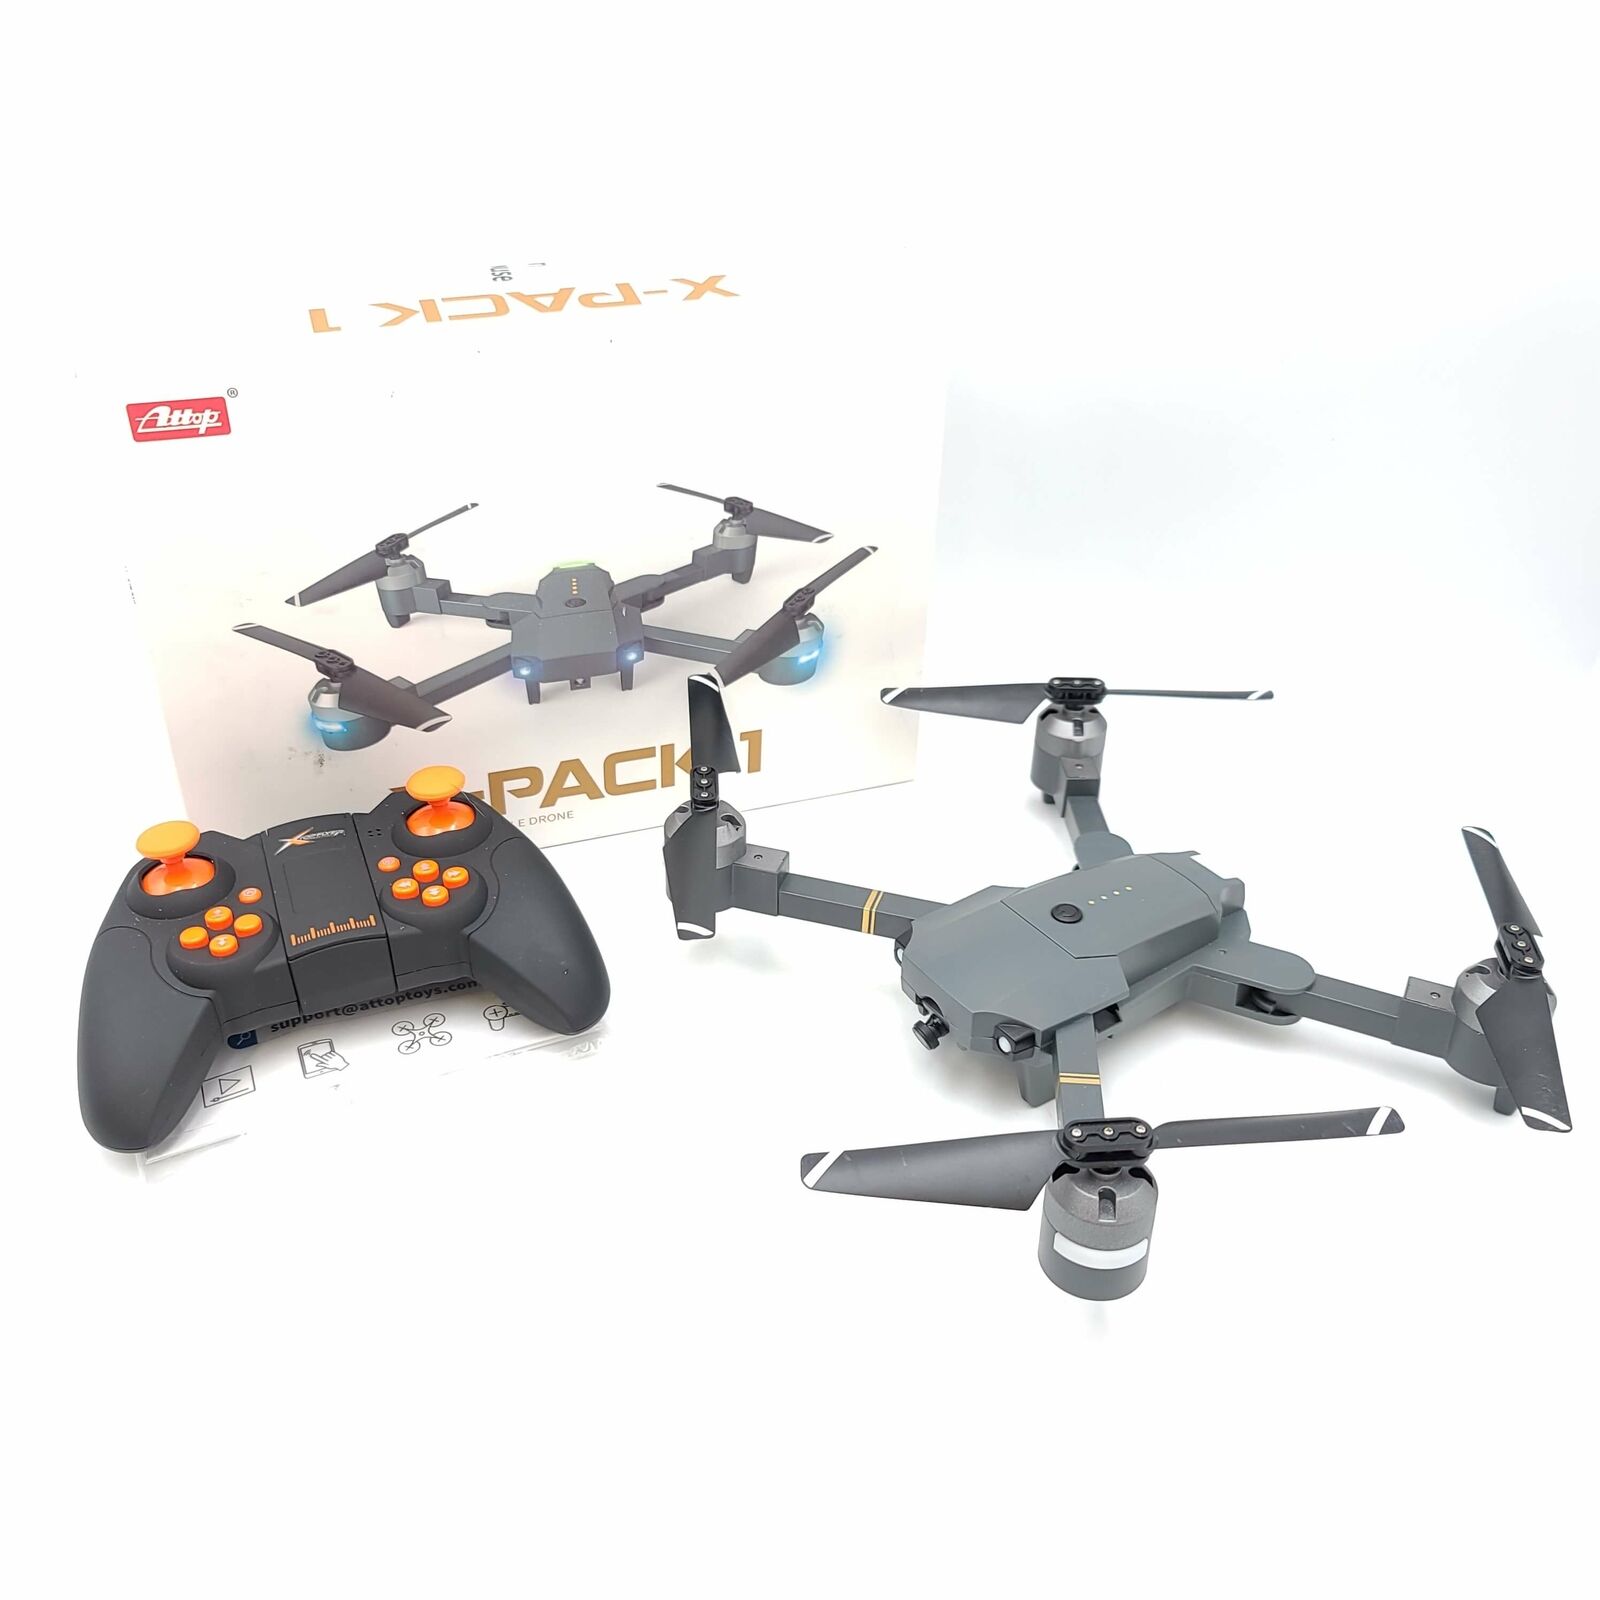 Attop X-pack1 2.4g Mini Foldable Flying Drone - For Parts Or Repair Only